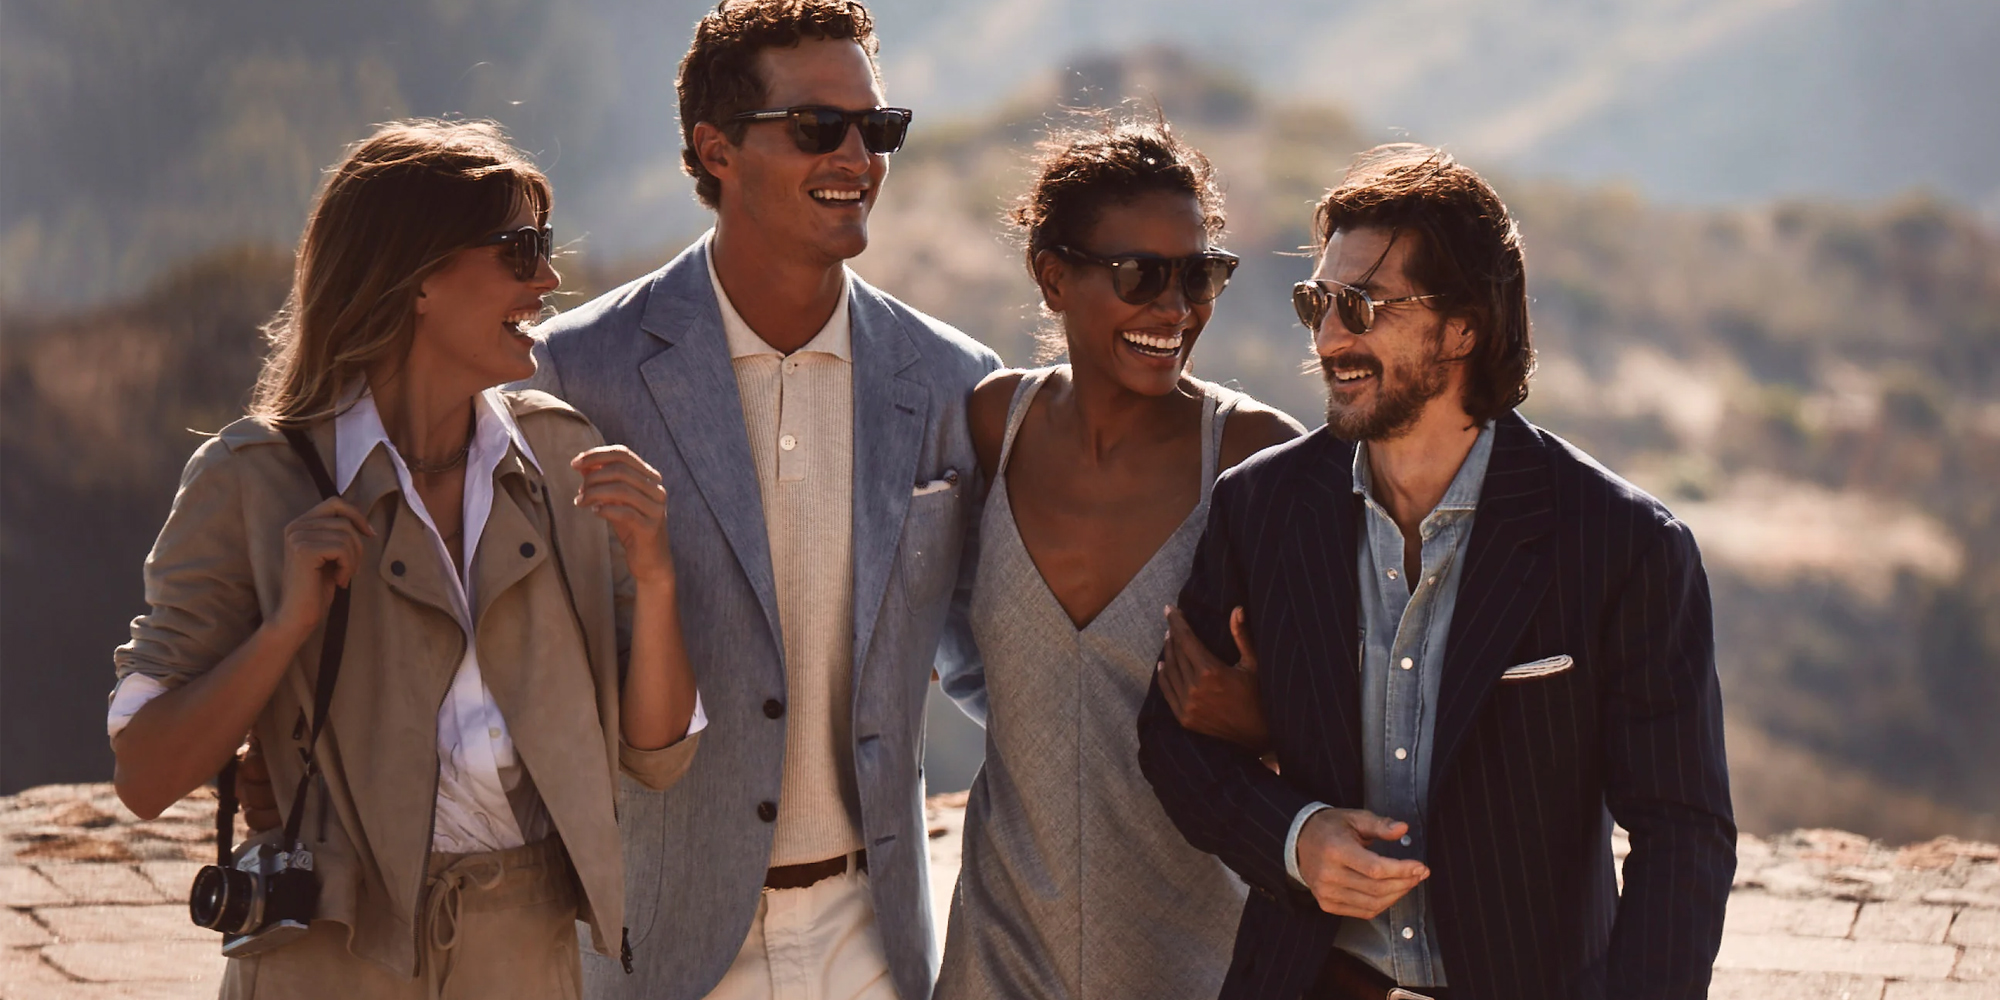 OLIVER PEOPLES X BURNELLO CUCINELLI EYEWEAR COLLECTION FILM